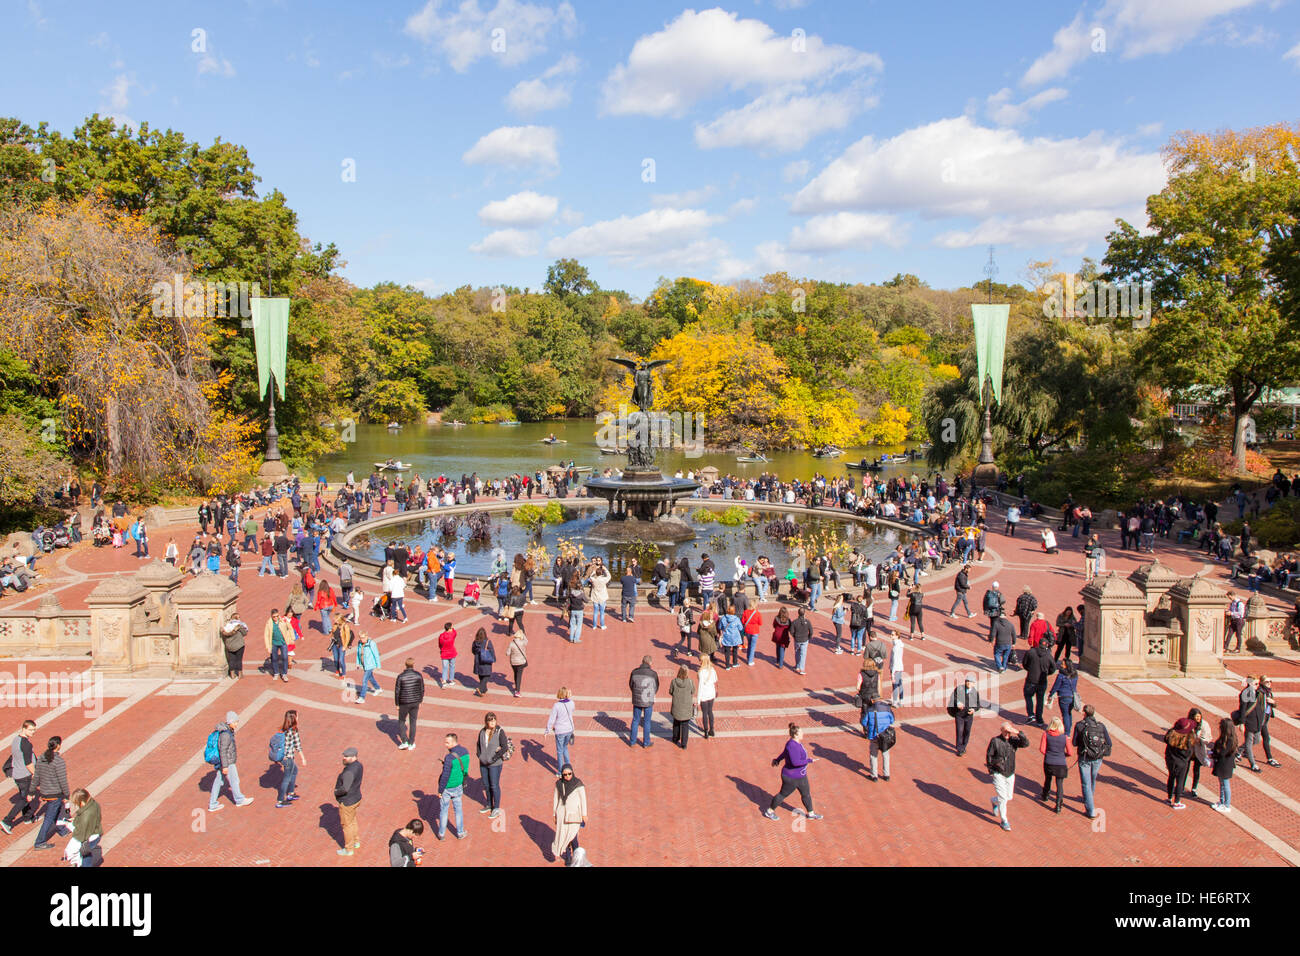 Bethesda Fountain 1246 - Made and Curated